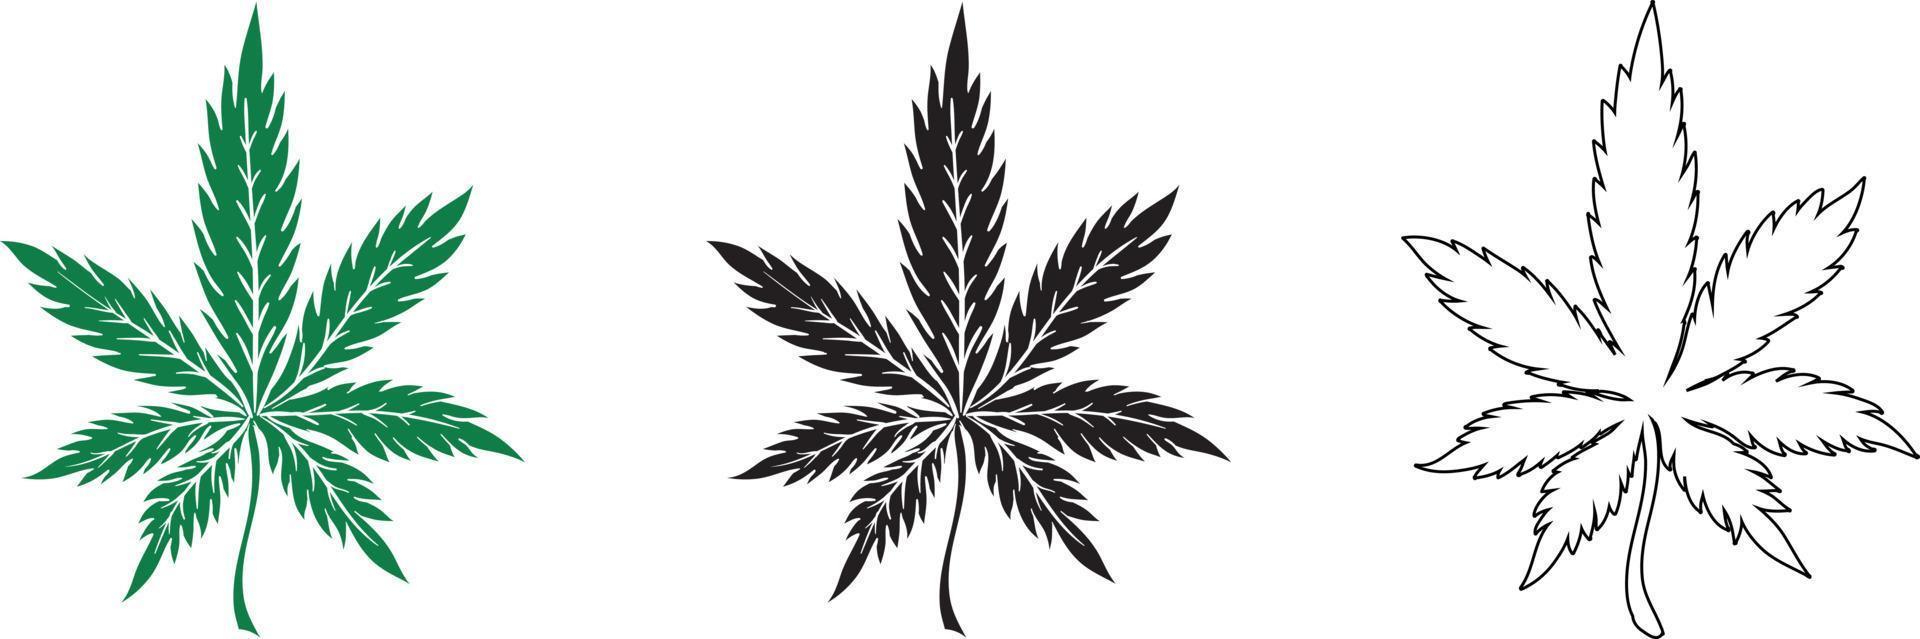 Cannabis leaf icon, vector illustration isolated on white background